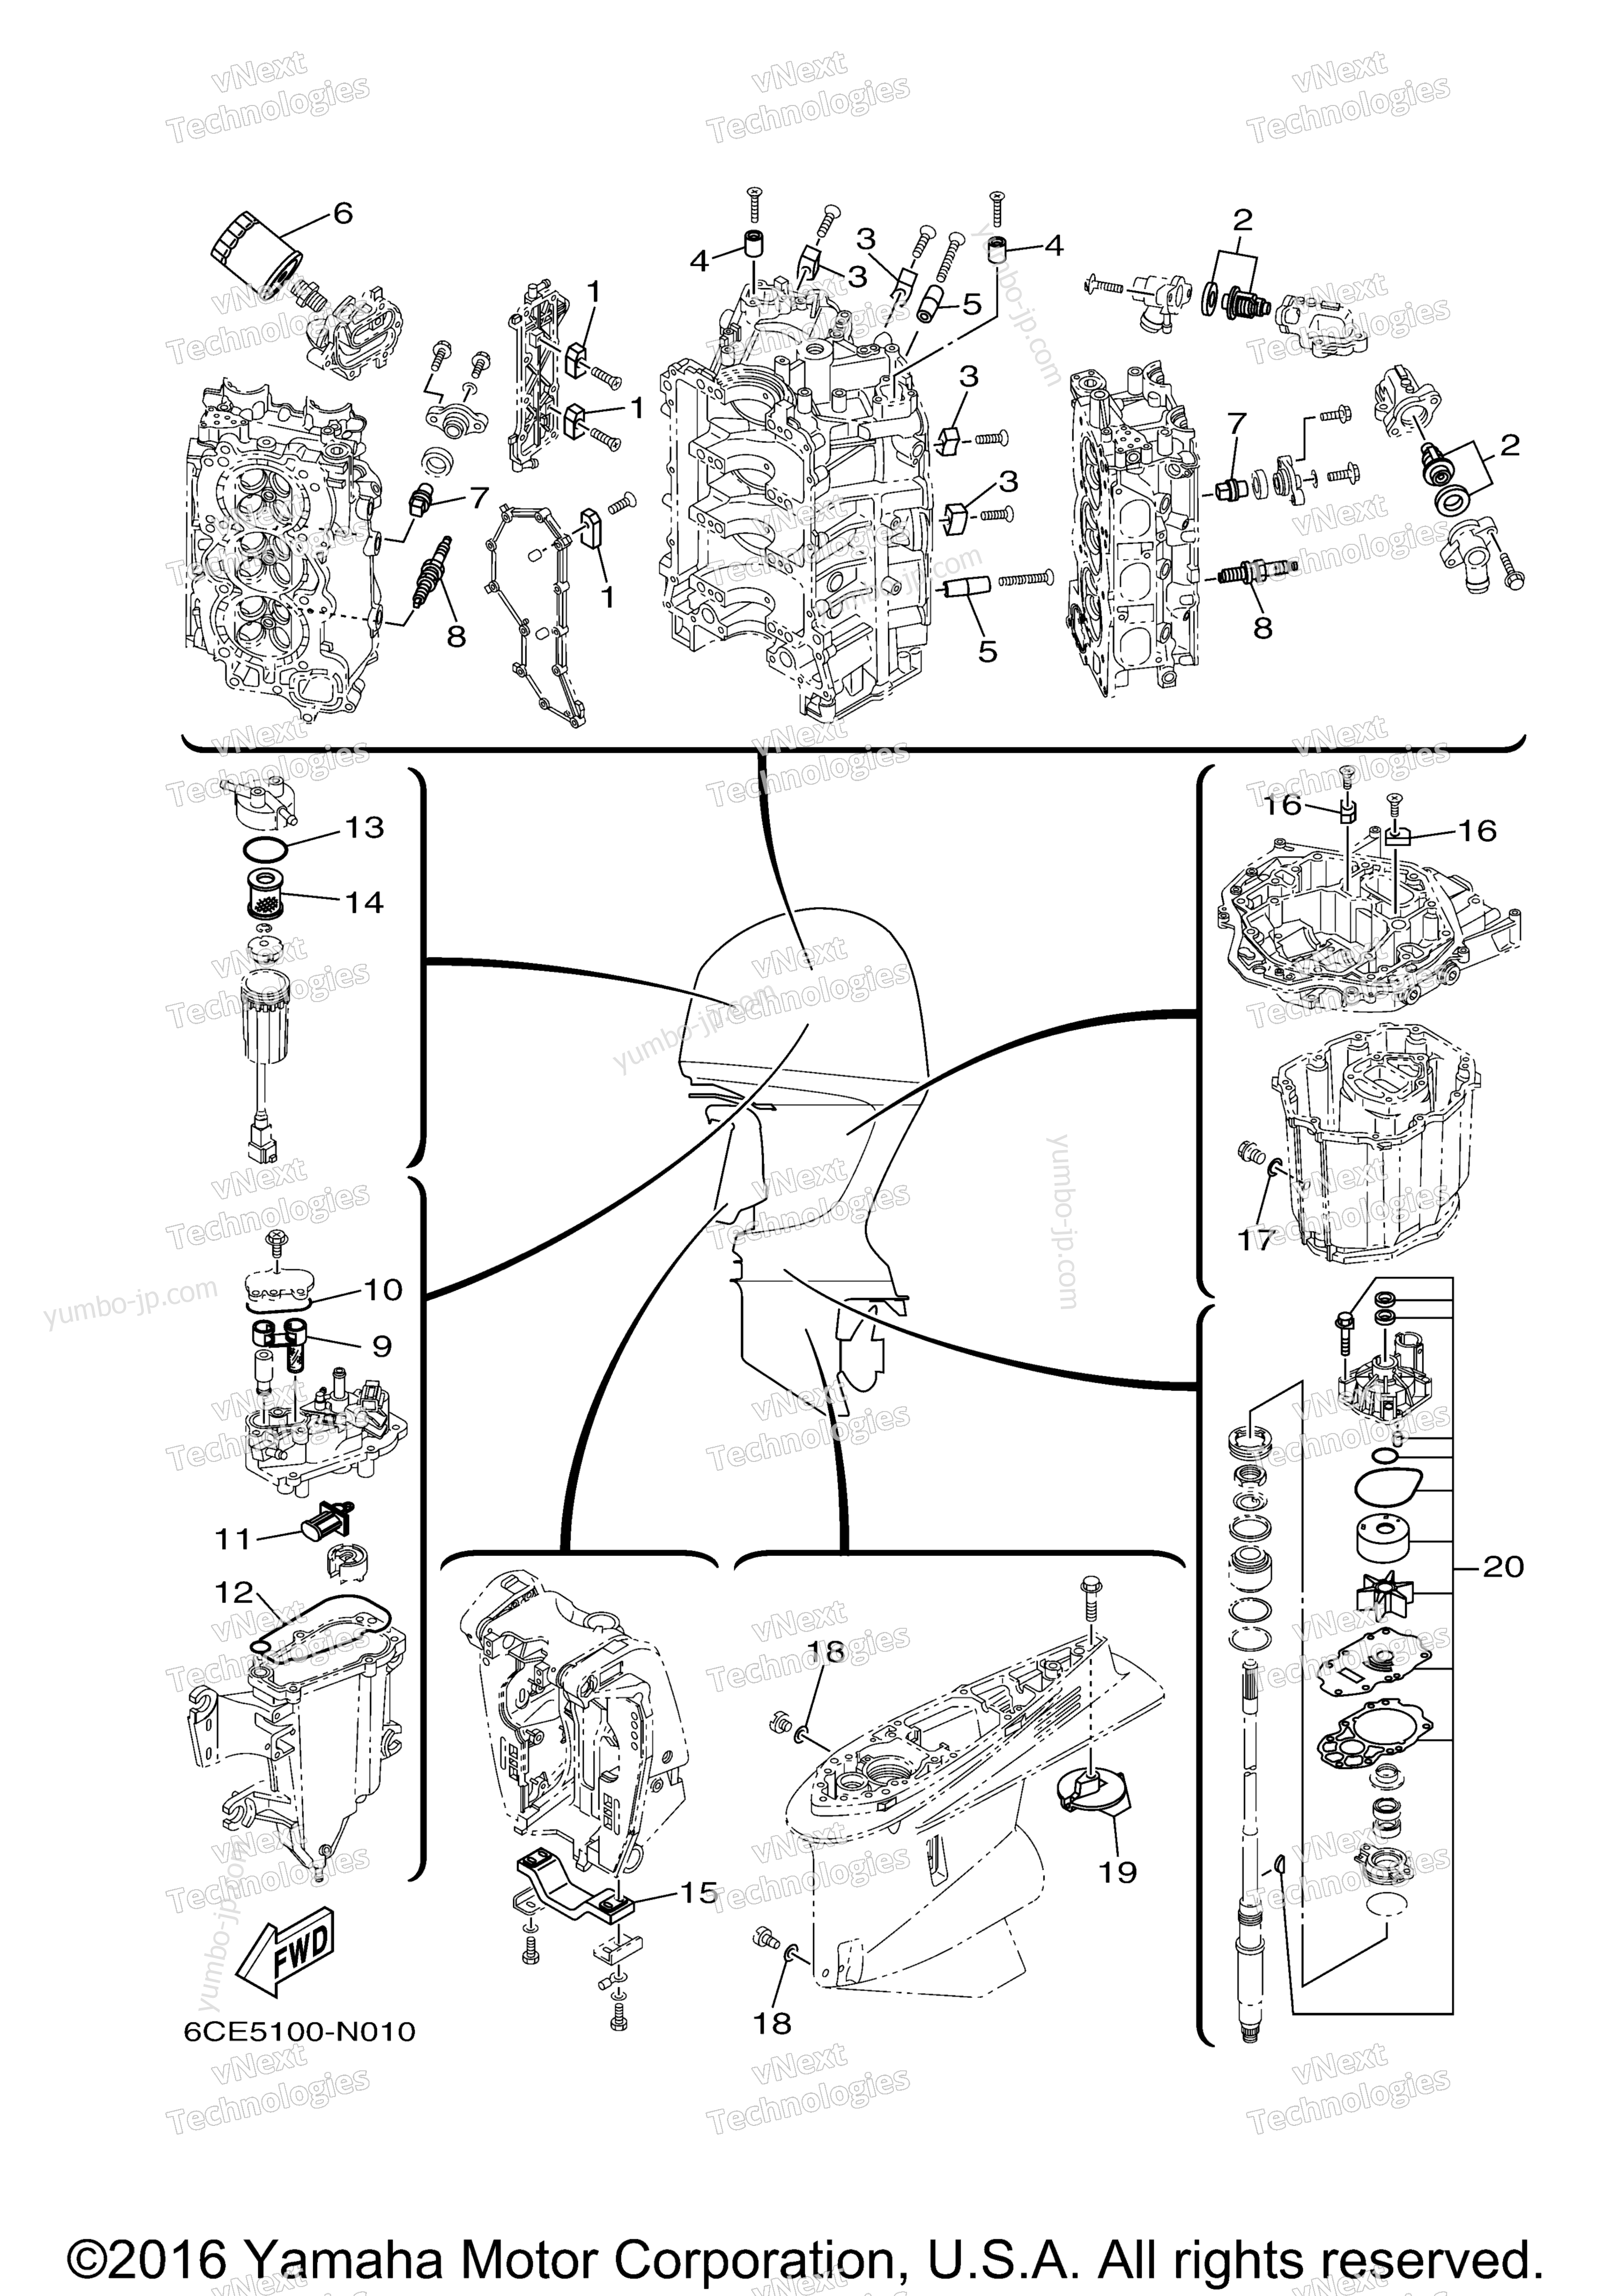 Scheduled Service Parts for outboards YAMAHA F300BETX (0116) 2006 year